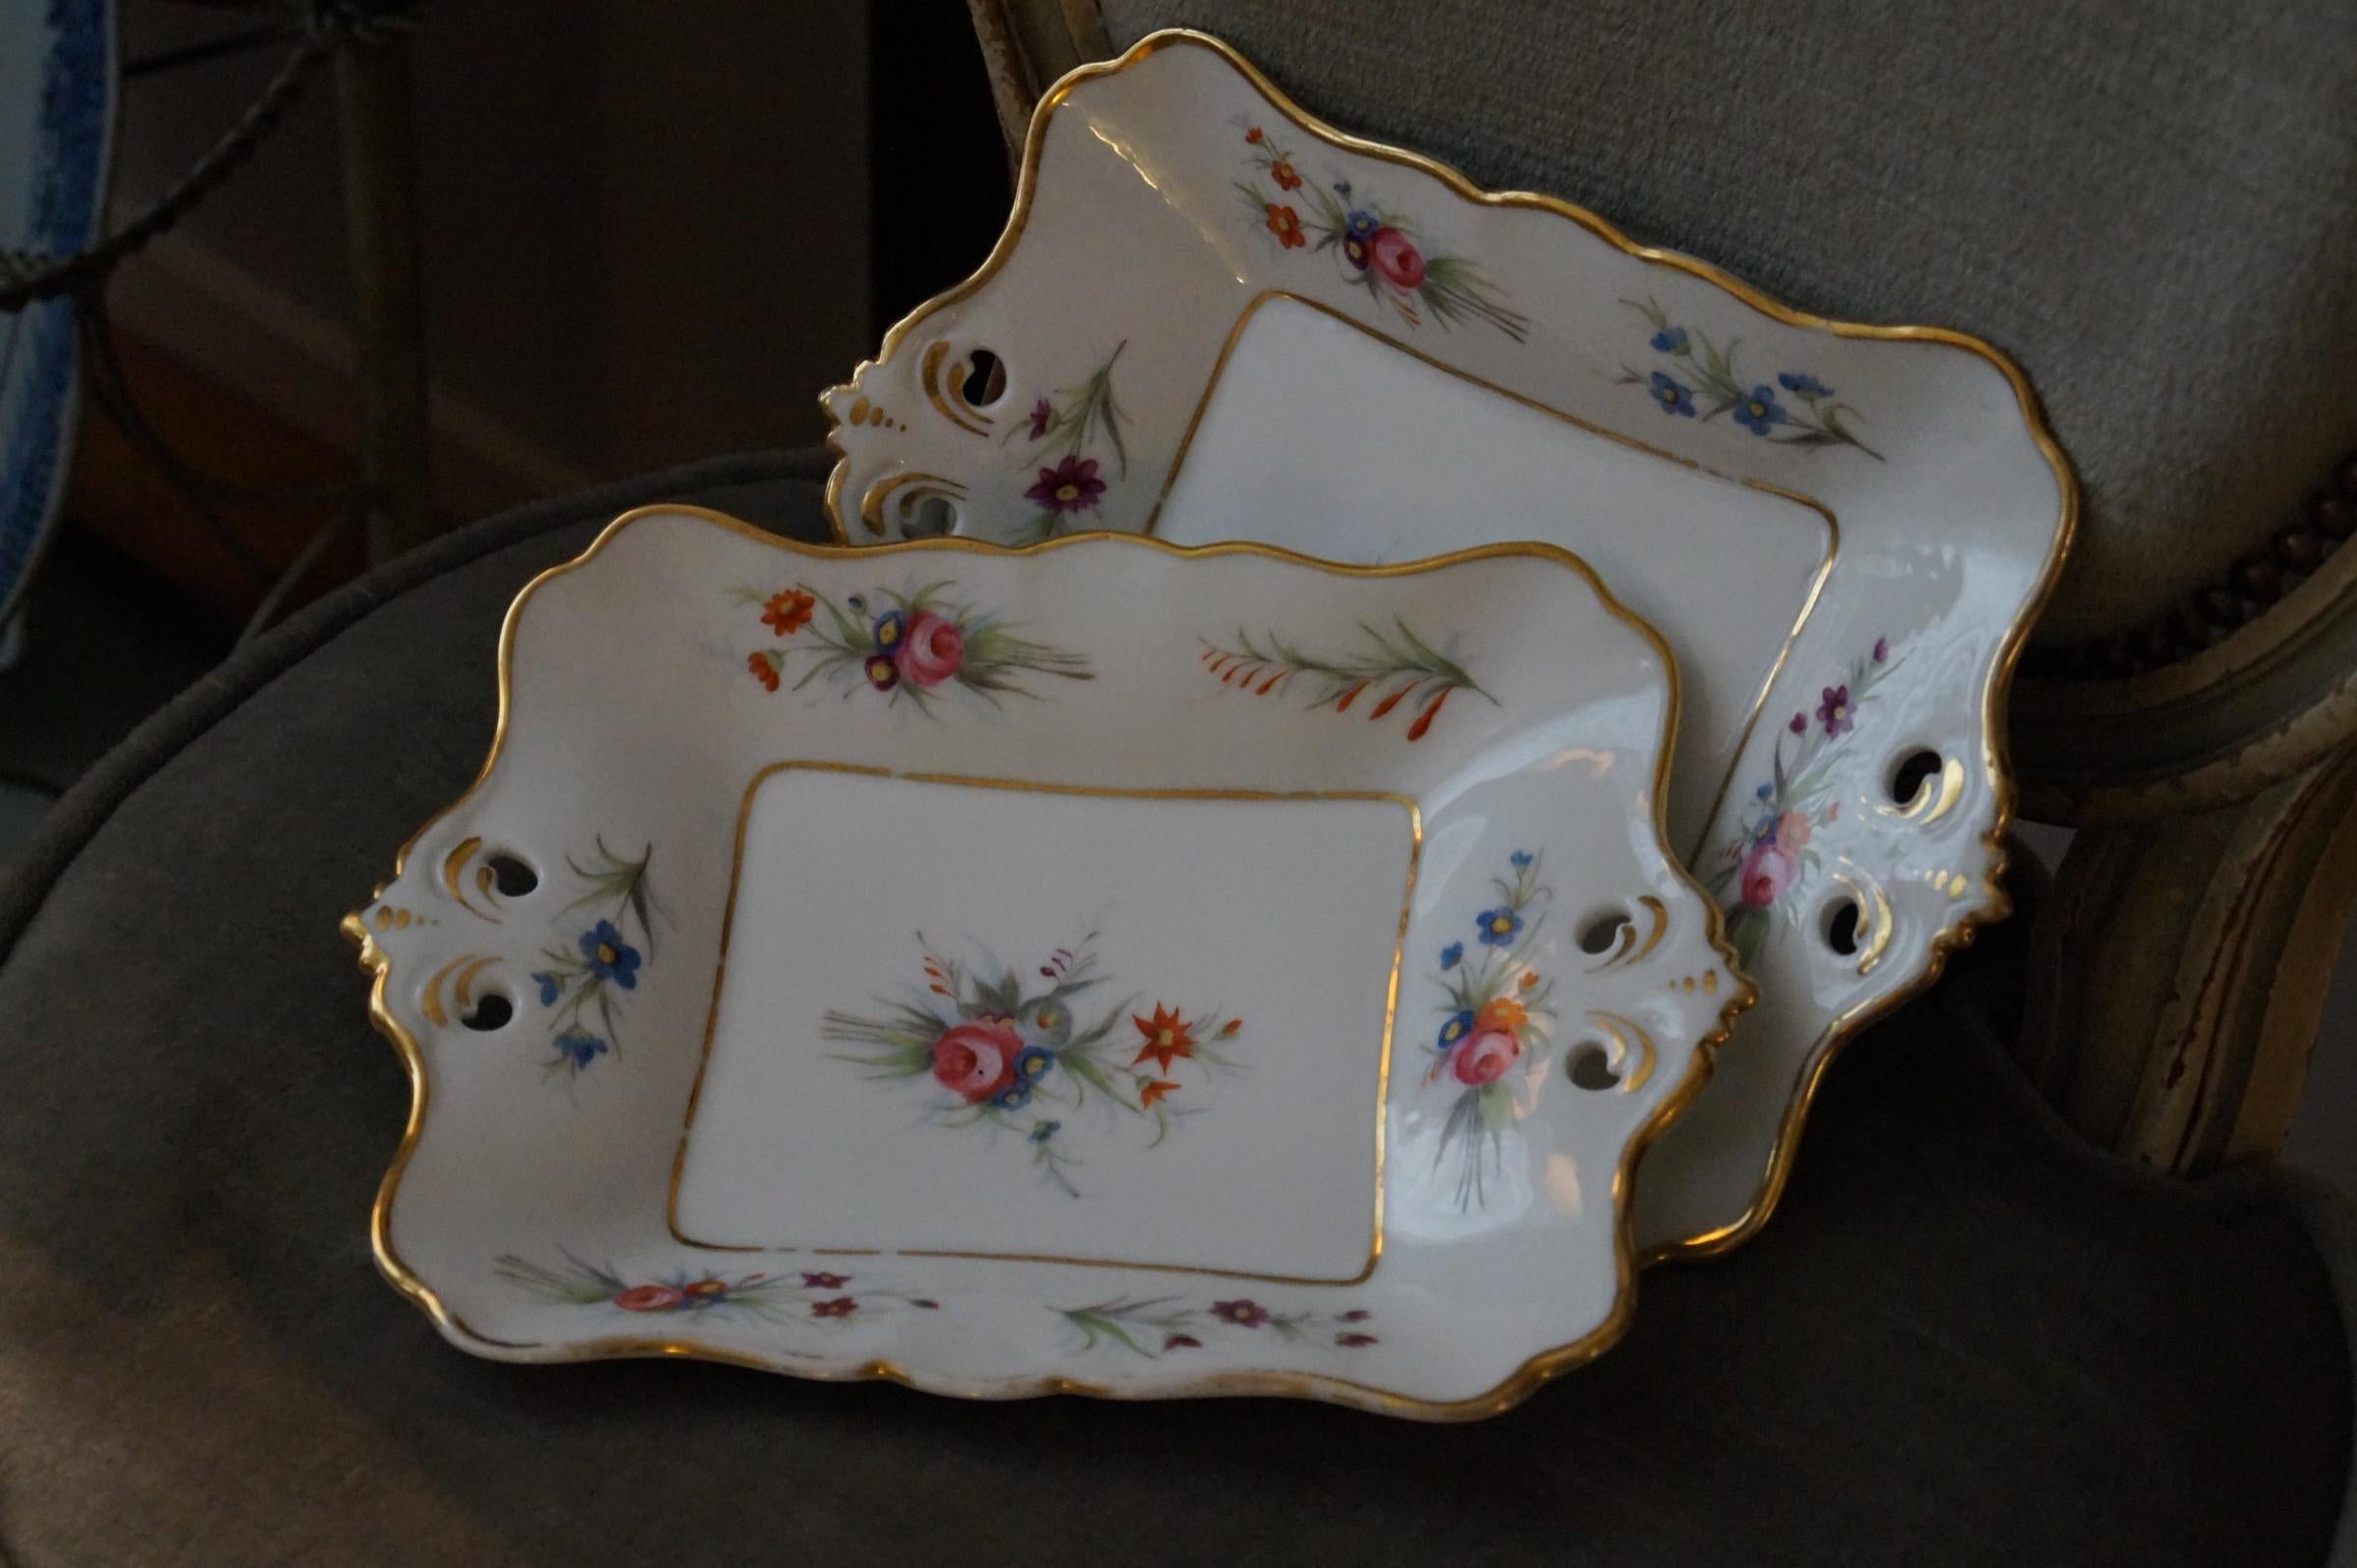 France, 1880.
Hand painted with flowers and decorated with gold.
Good condition. Only some wear on the gold.

Measures: 17cm x 24.5cm.
 